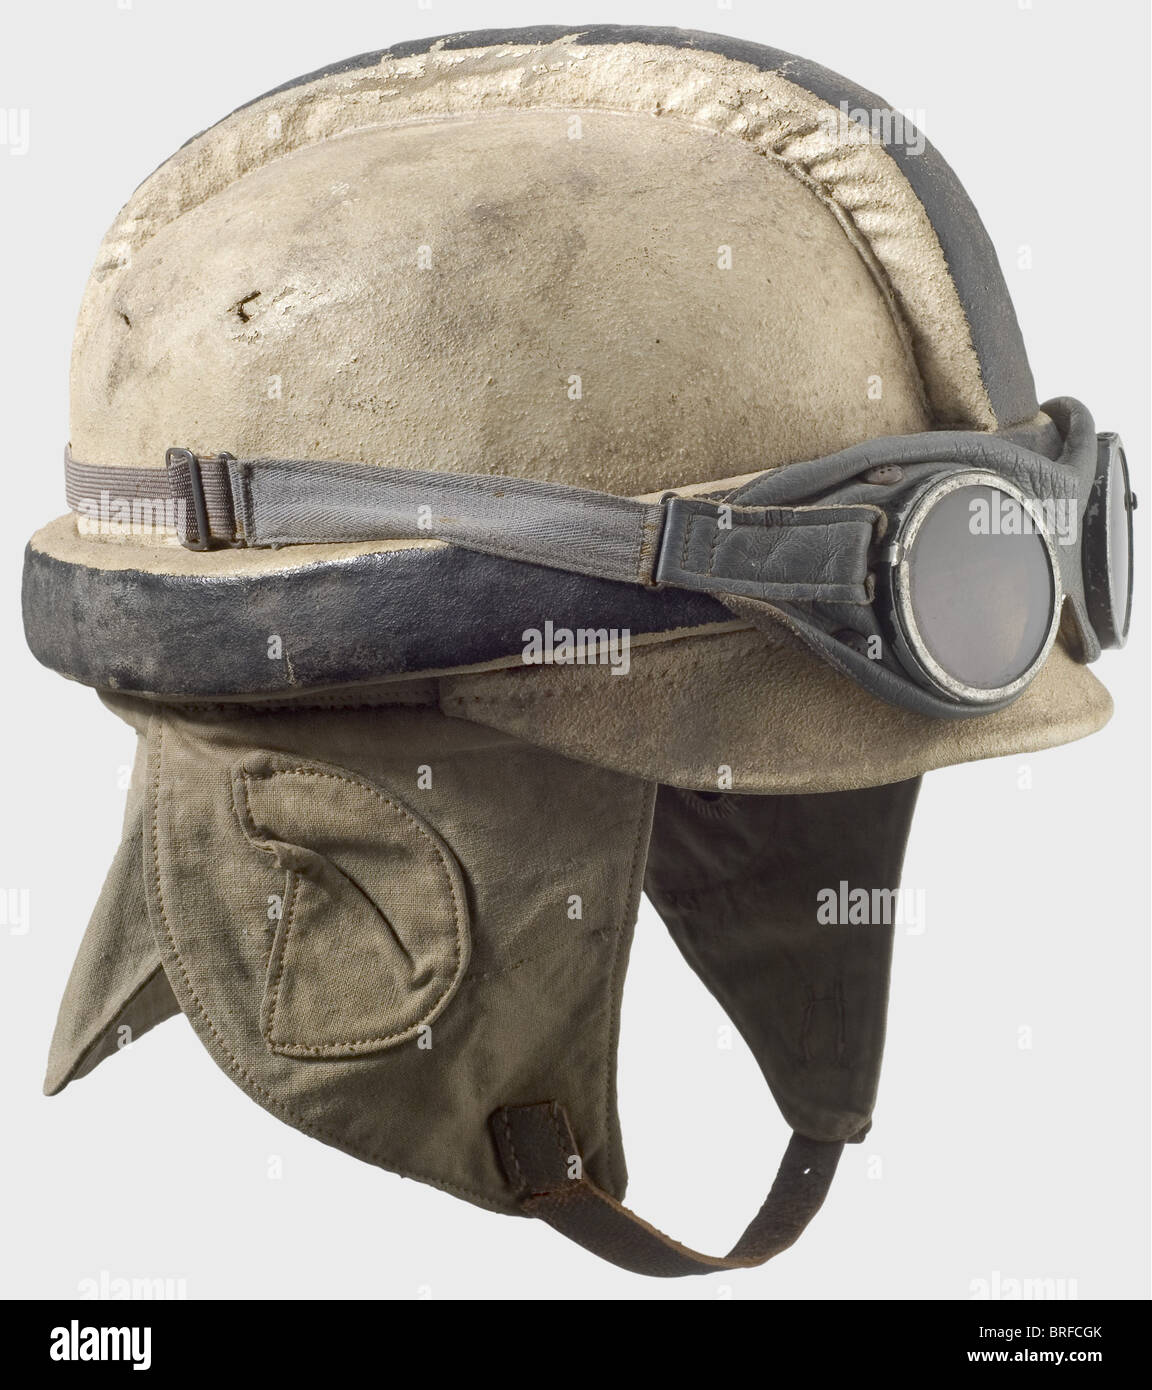 A pilot's crash helmet., The body is covered with white painted linen, the vertex and circumferential padding painted black. Field grey linen earflaps and neck cloth (stamped 'FL.B.1' and '1916'). Leather lining. Chinstraps torn off. It comes with grey leather goggles with tinted lenses. historic, historical, 1910s, 20th century, troop, troops, armed forces, military, militaria, army, wing, group, air force, air forces, helmet, helmets, headgear, headgears, protection, protective, uniform, uniforms, utensil, piece of equipment, utensils, outfit, outfits, headpi, Stock Photo